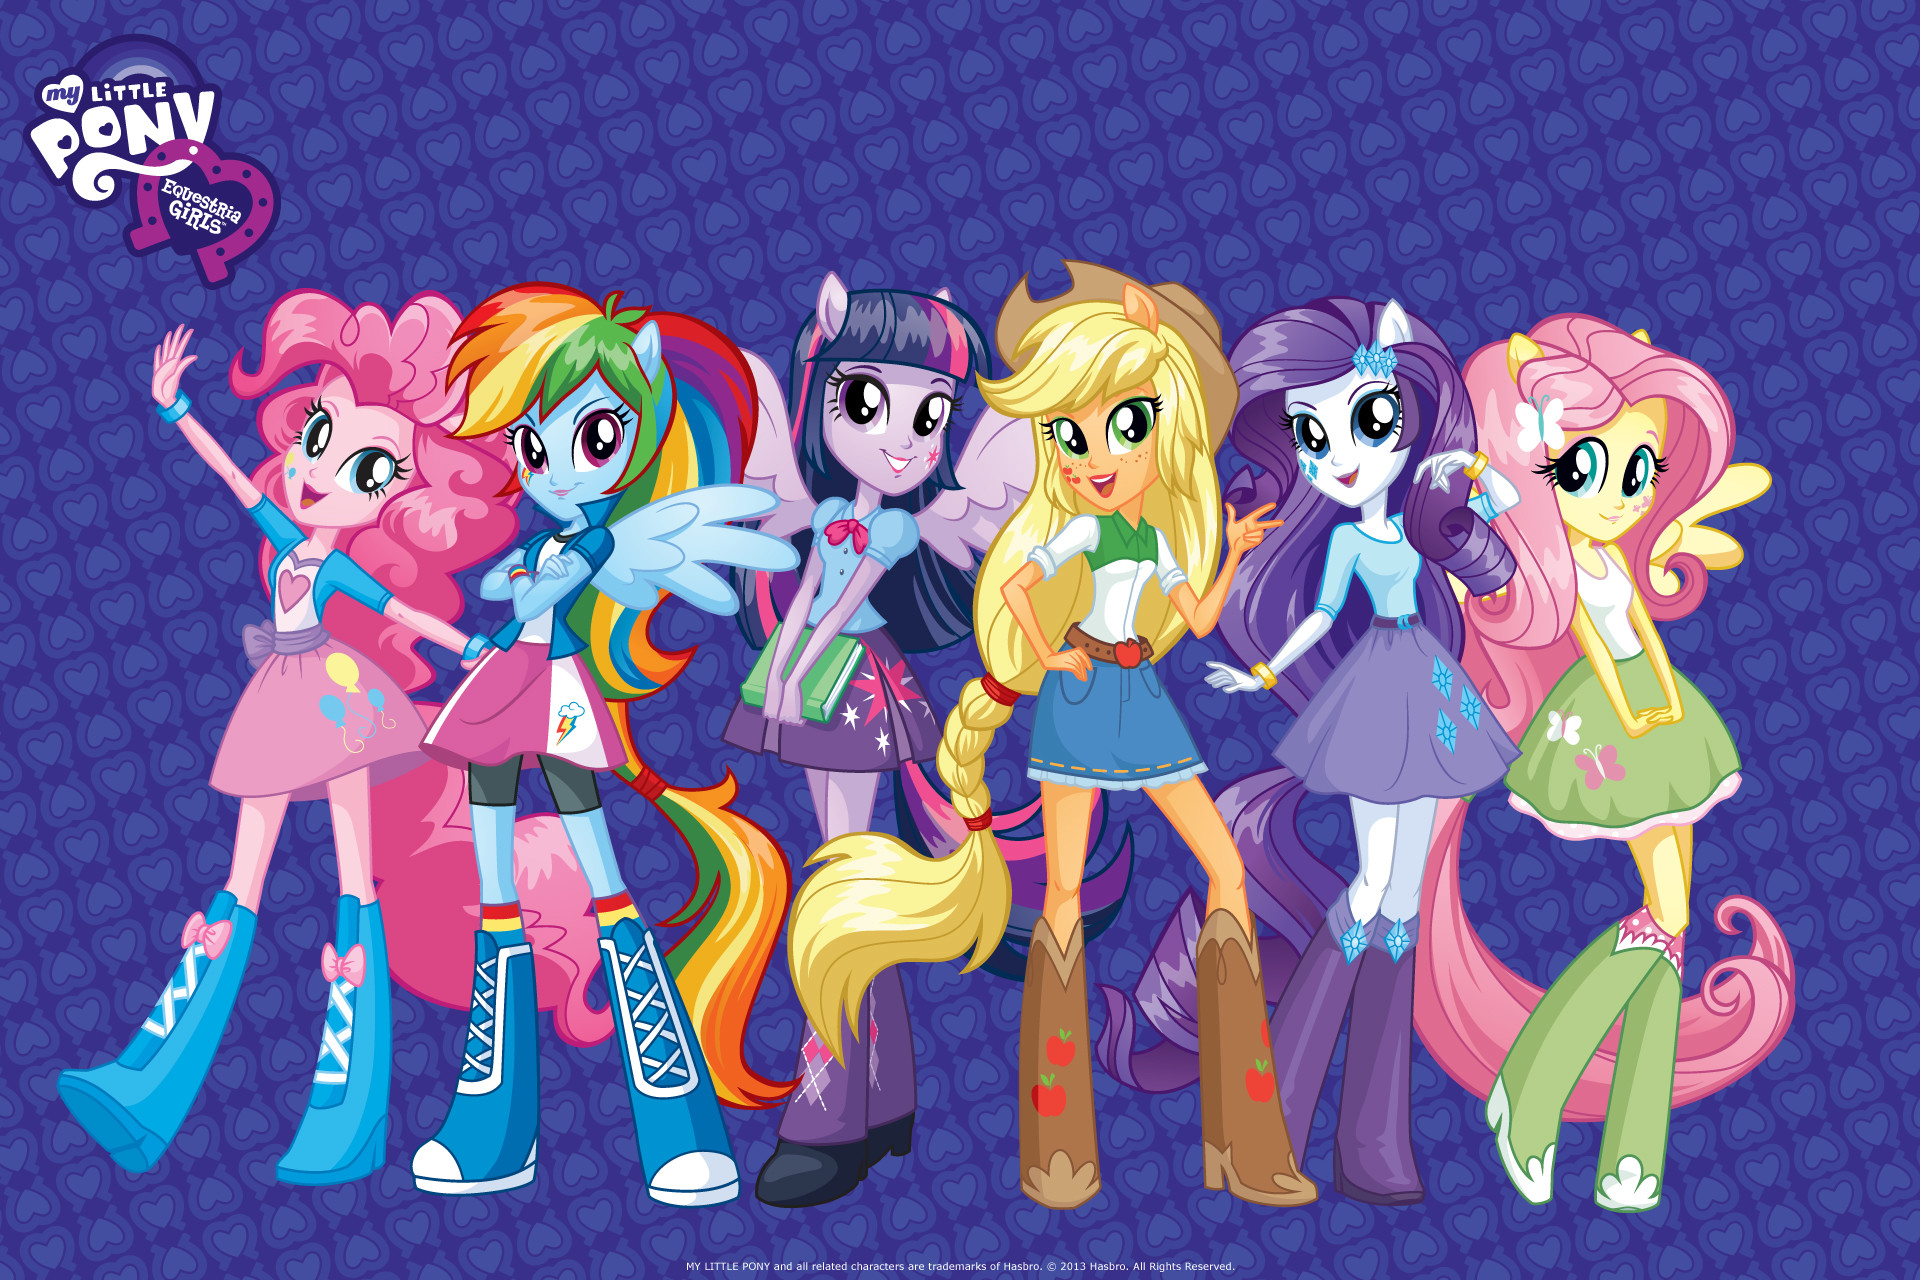 1920x1280 My Little Pony Friendship is Magic images Baby Wallpapers HD | HD .